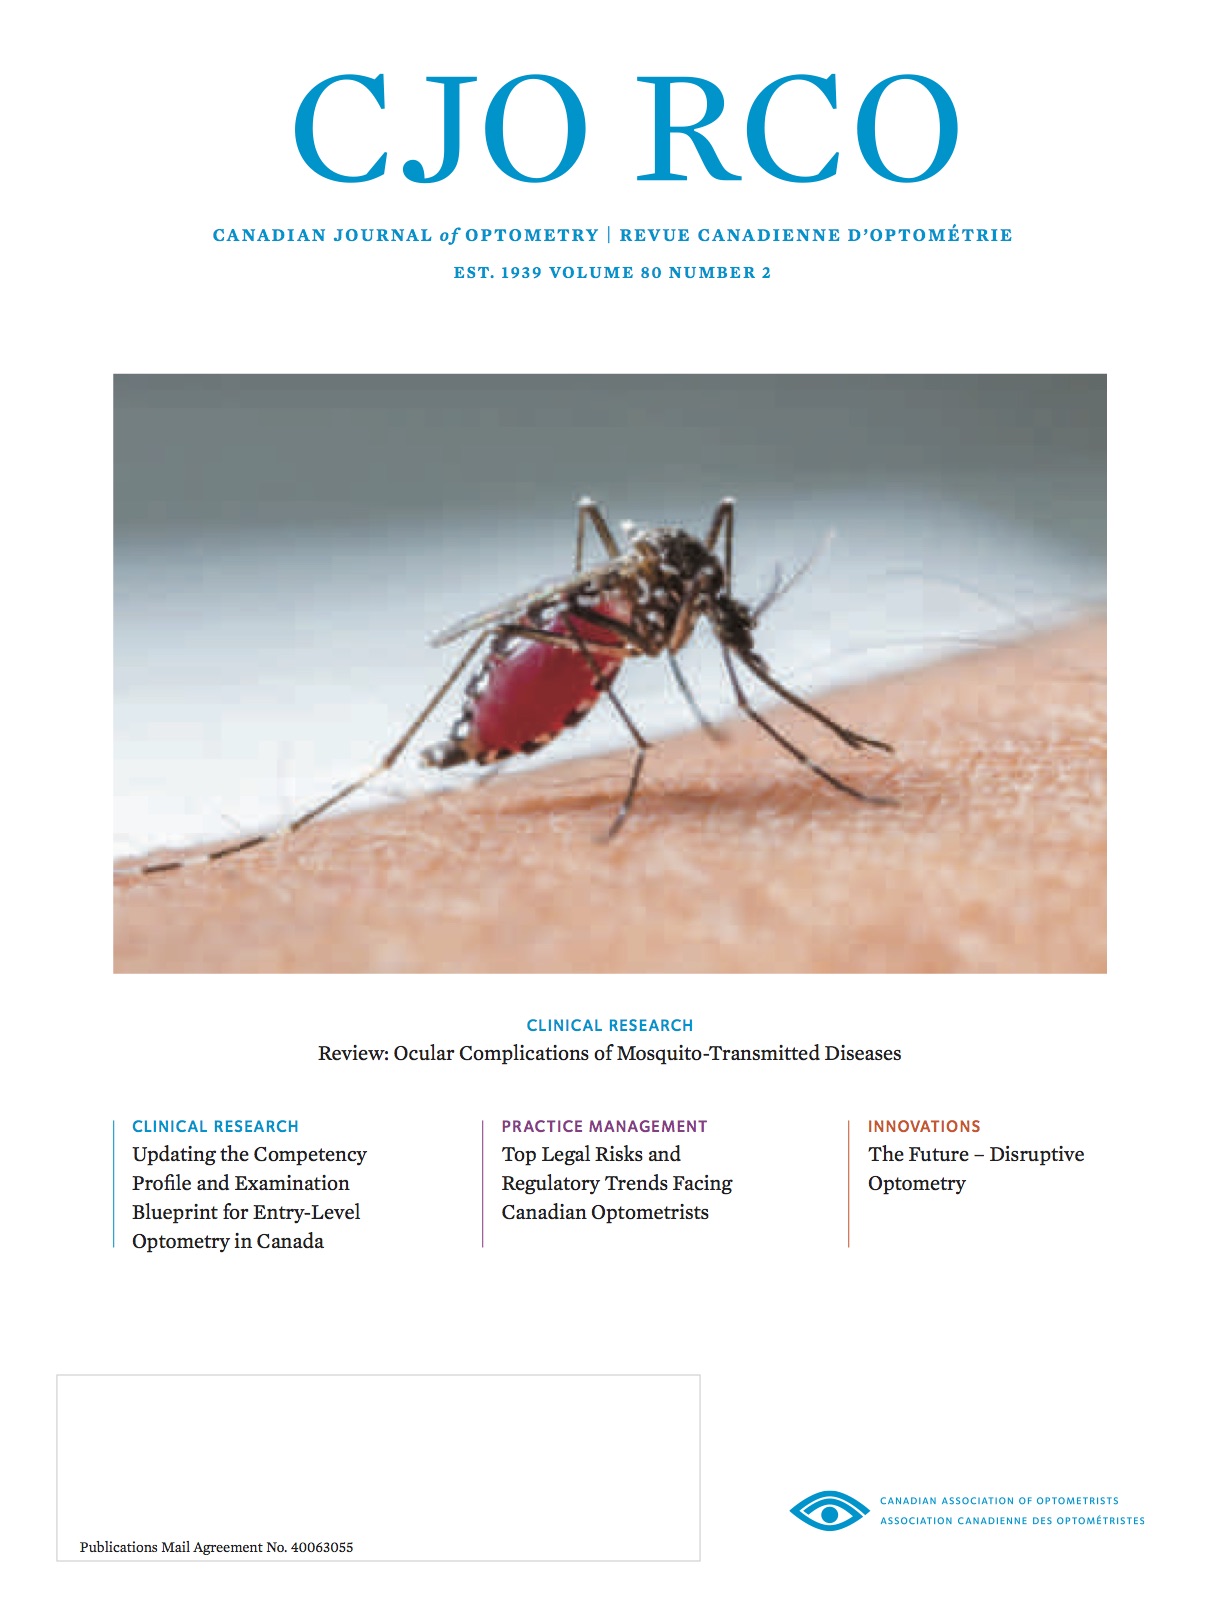 Cover of CJO Volume 80 Number 2, showing a mosquito on human skin.